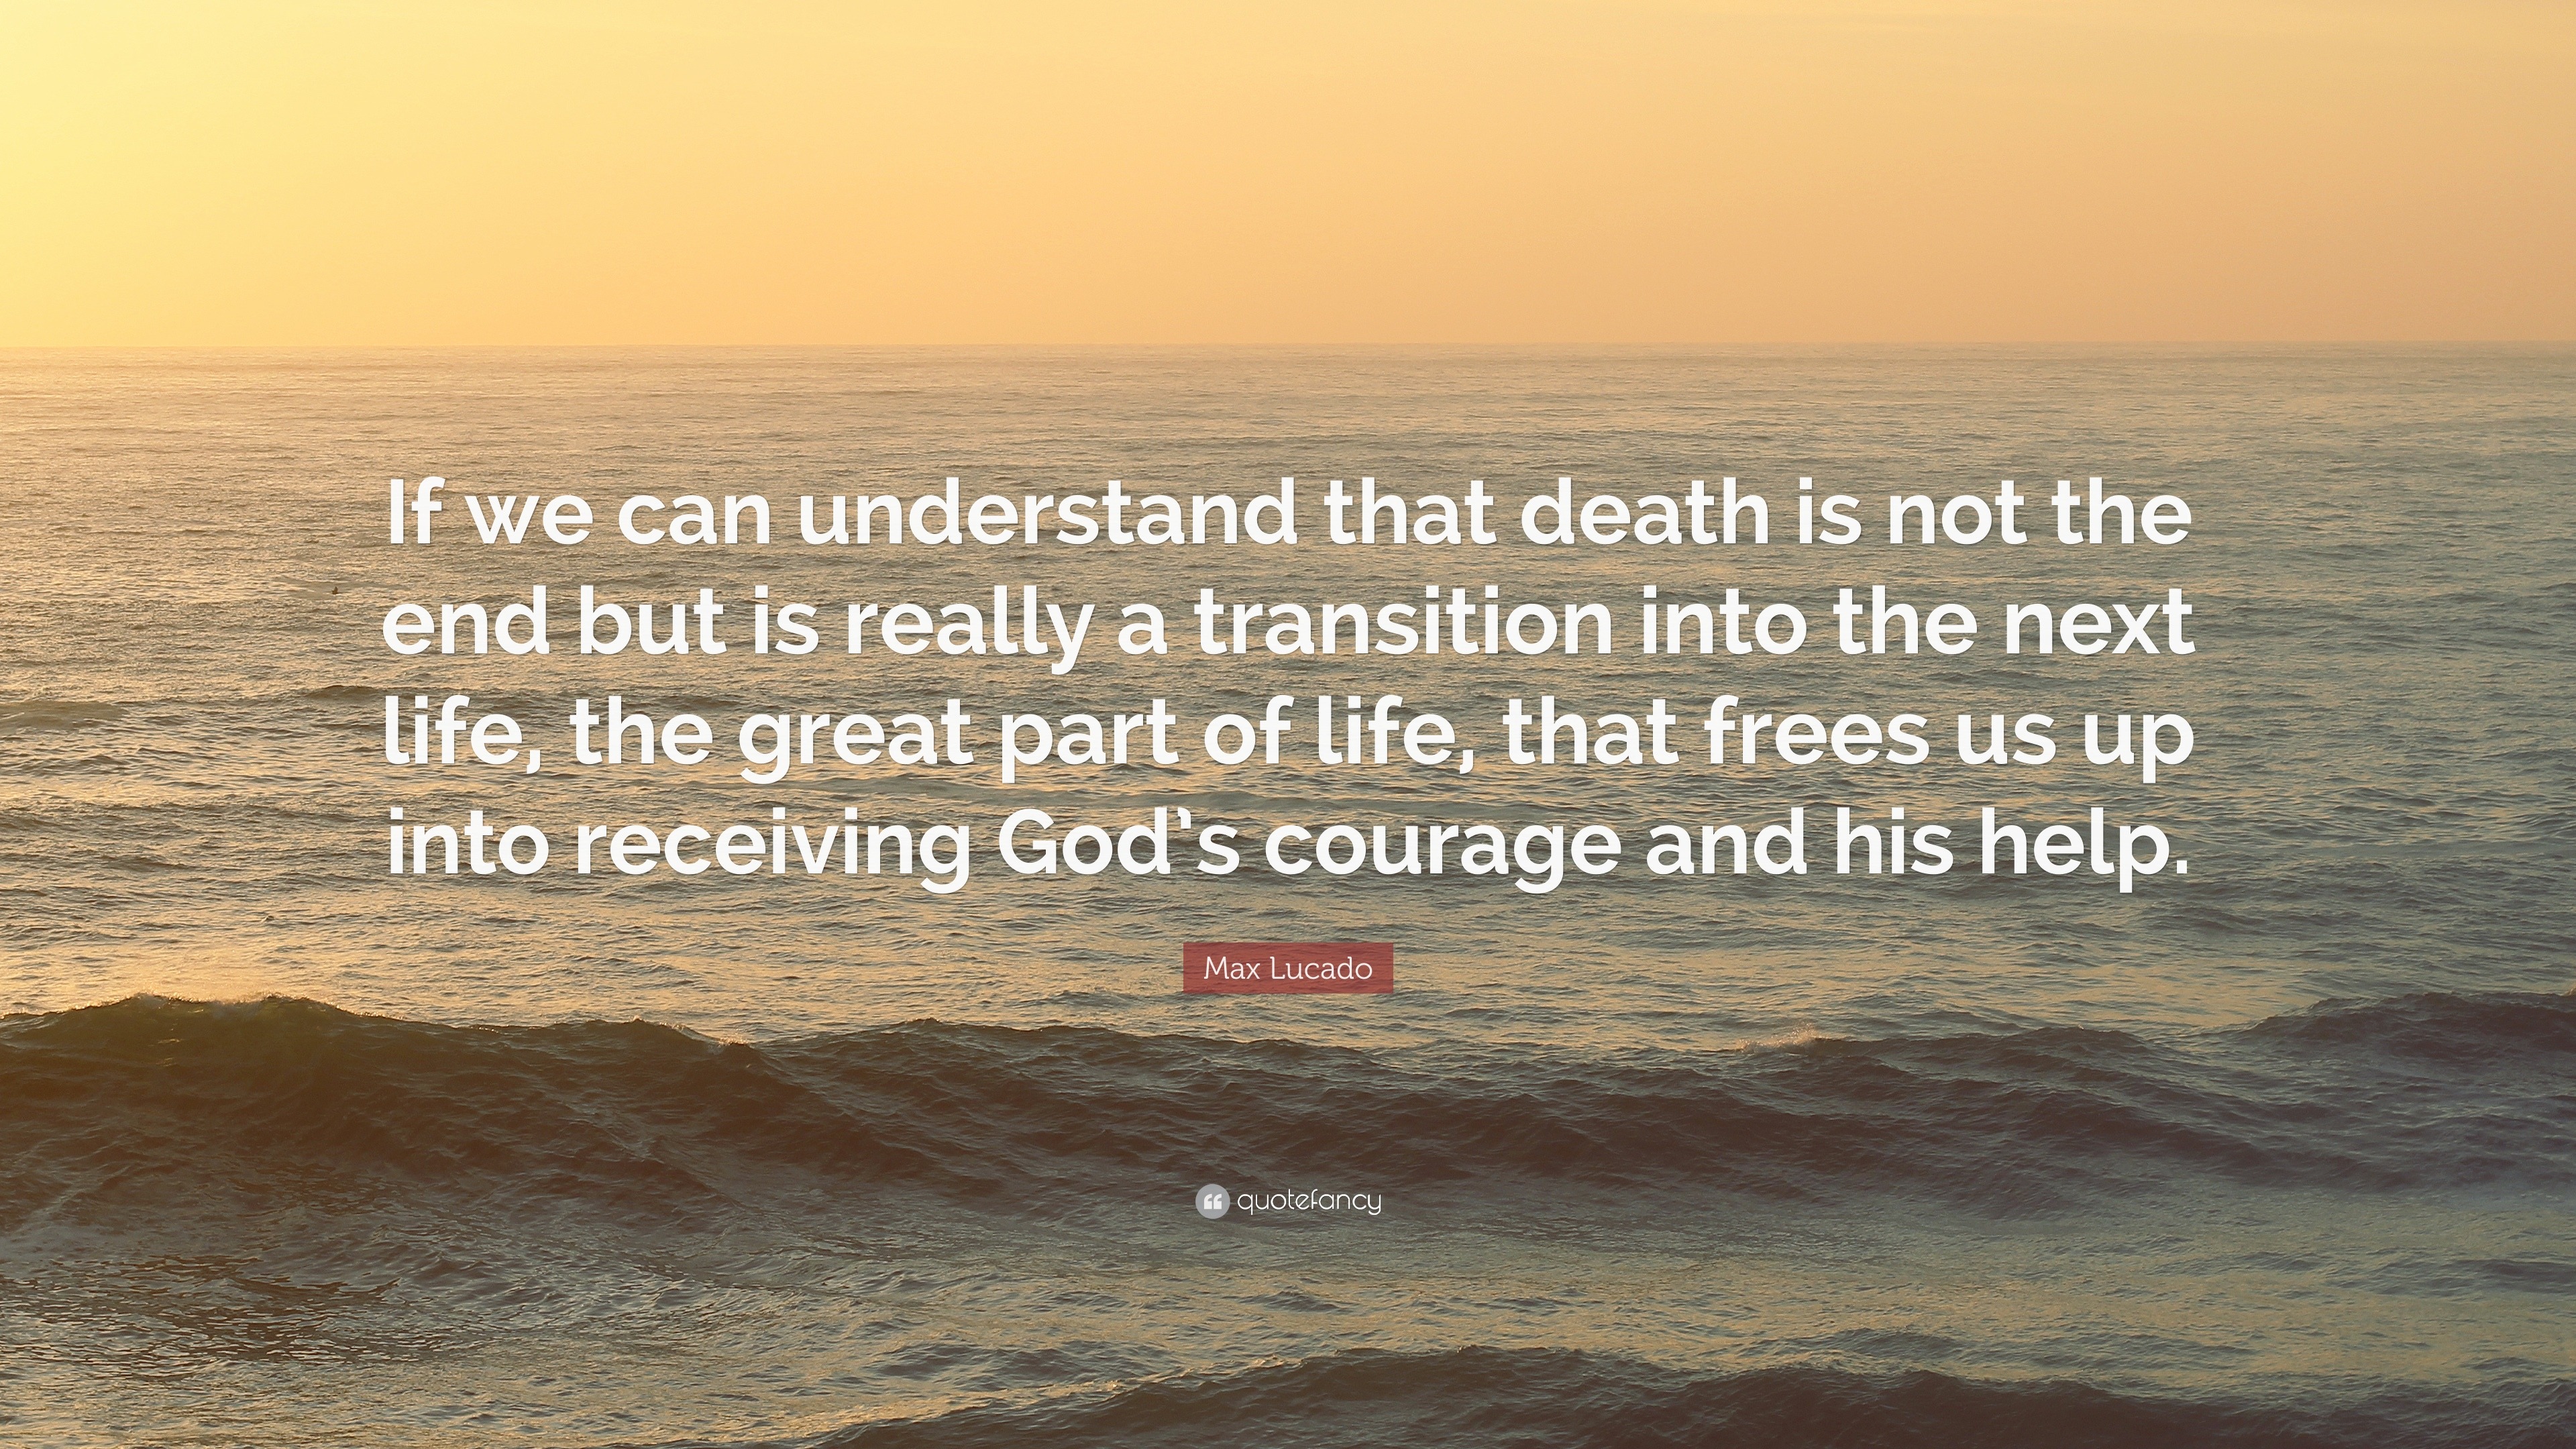 1955367 Max Lucado Quote If we can understand that death is not the end